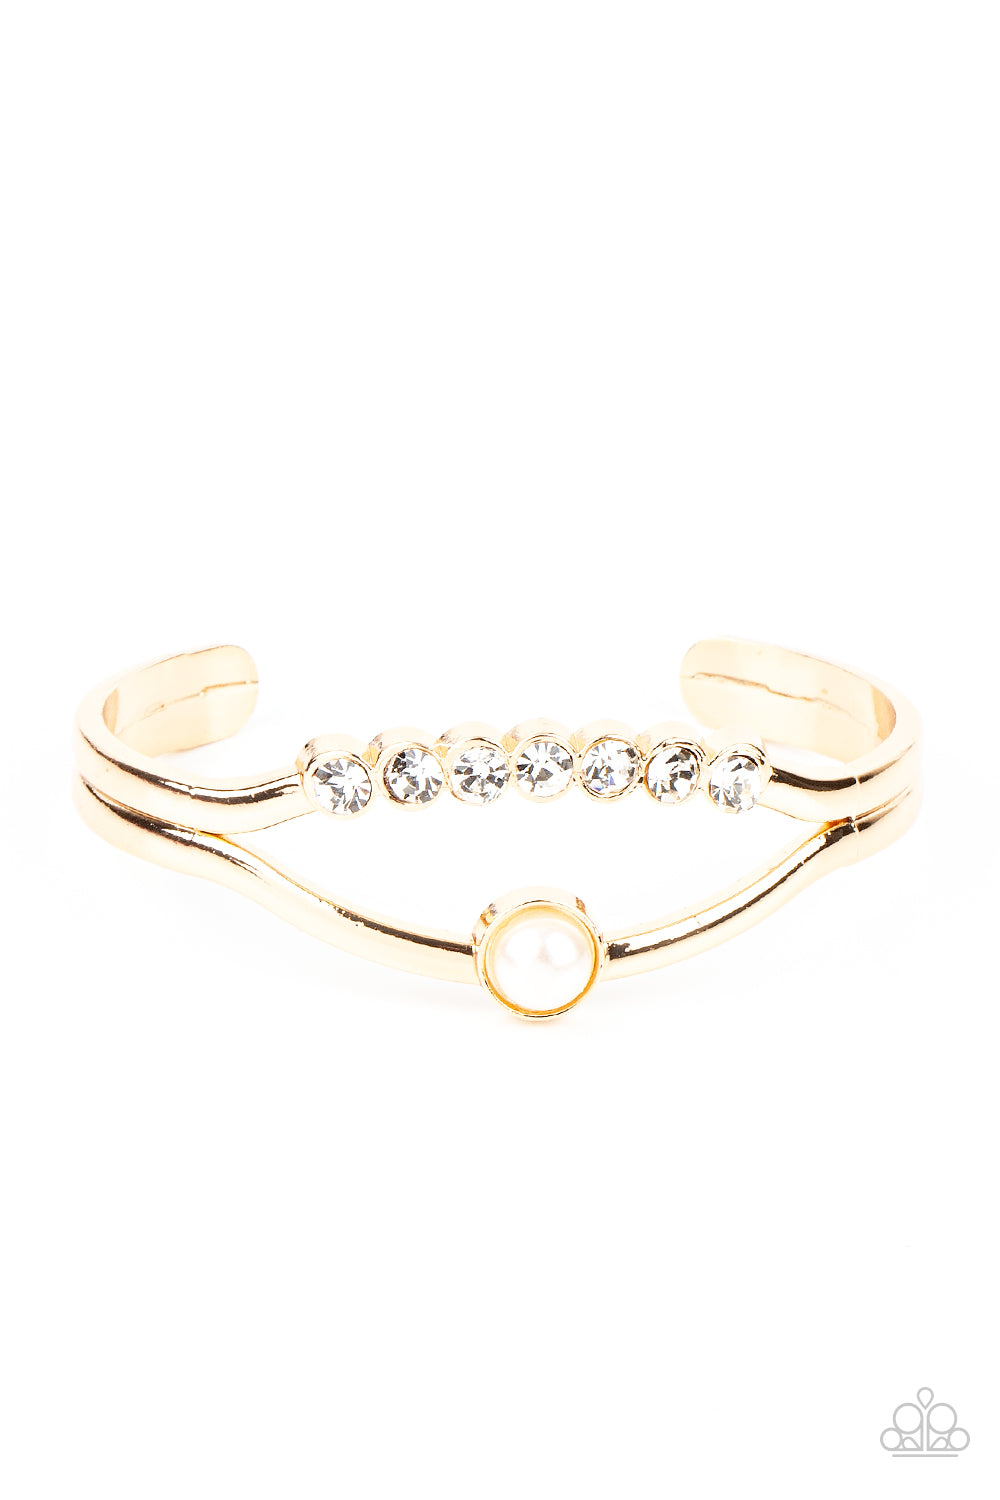 Palace Prize - Gold Pearl Bracelet - Paparazzi Accessories - A row of glassy white rhinestones and a solitaire white pearl adorn the layered center of a classic gold cuff, creating a timeless piece around the wrist. Sold as one individual bracelet.